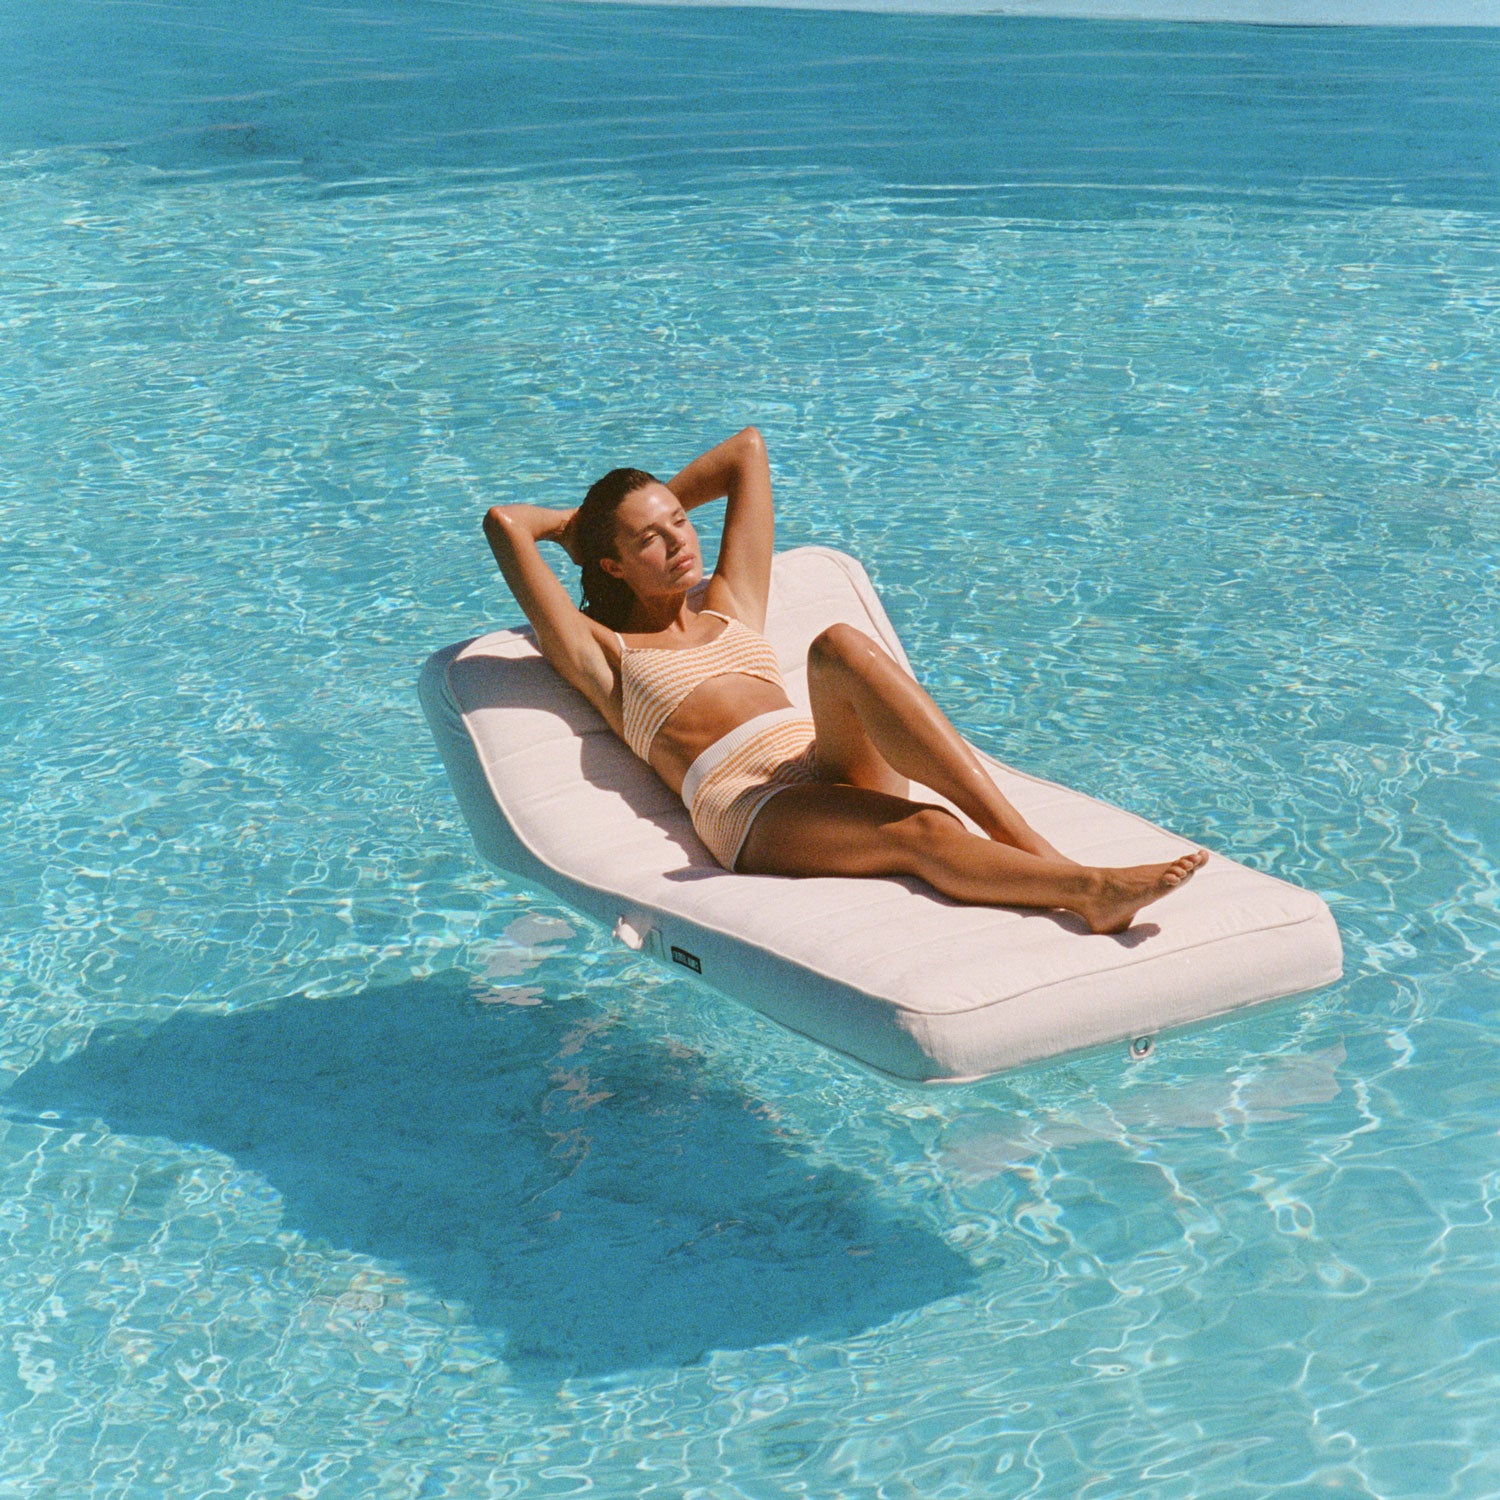 A women floating on a white pool float lounger for adults with her arms above her head in a blue swimming pool.